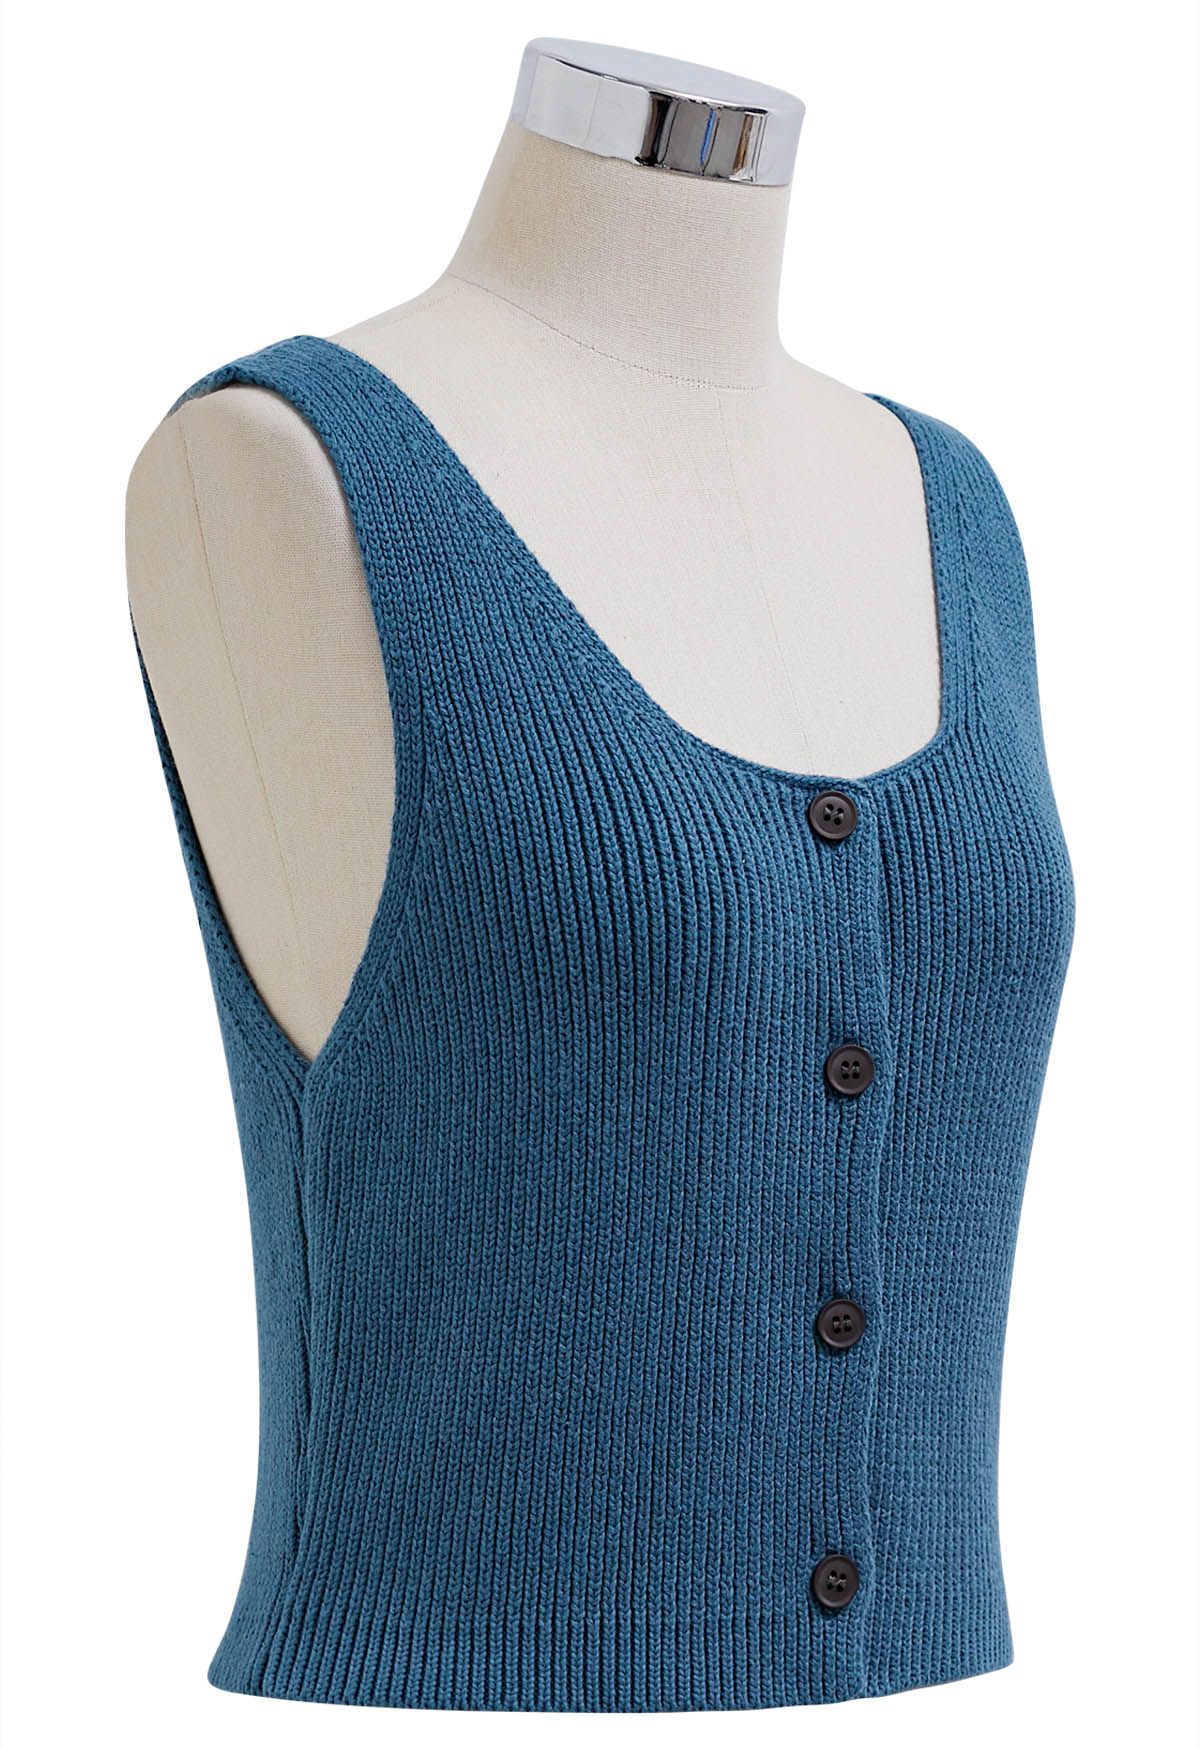 Button Down Sleeveless Knit Crop Top in Teal